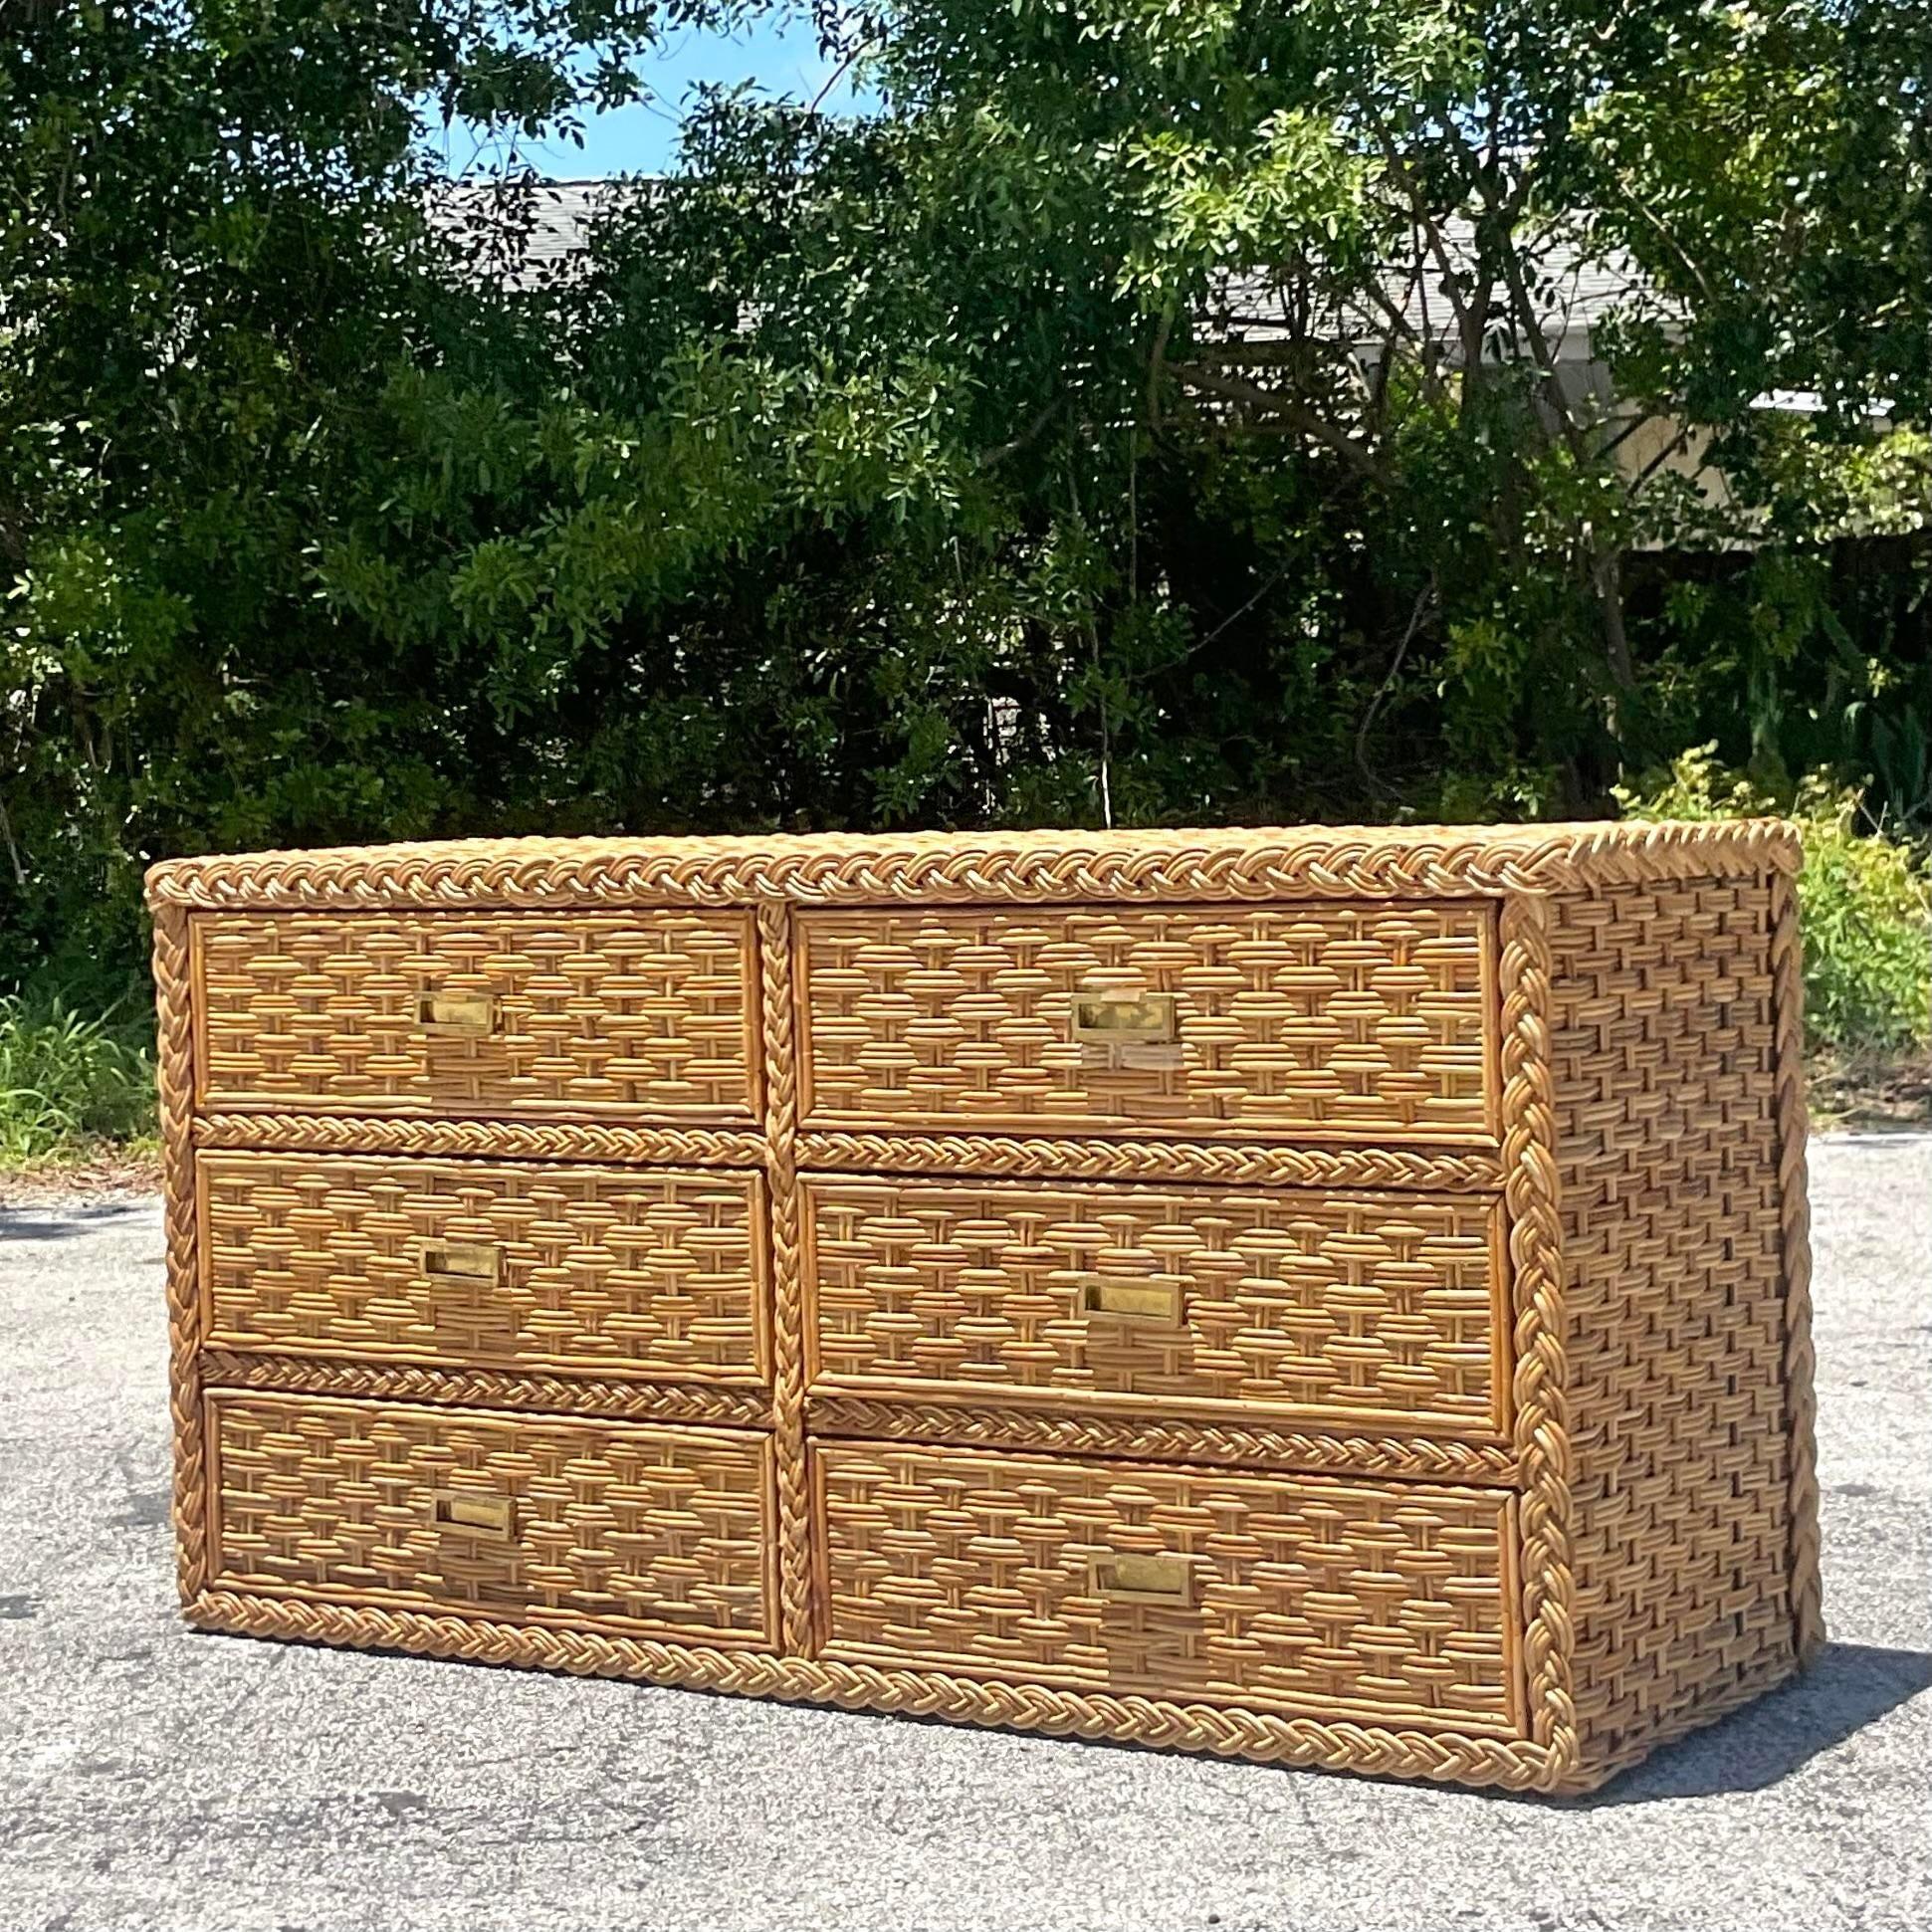 Embrace coastal elegance with this vintage braided rattan dresser. Handcrafted with American craftsmanship, its intricate braided design exudes seaside charm while providing functional storage, making it the perfect addition to any coastal-inspired